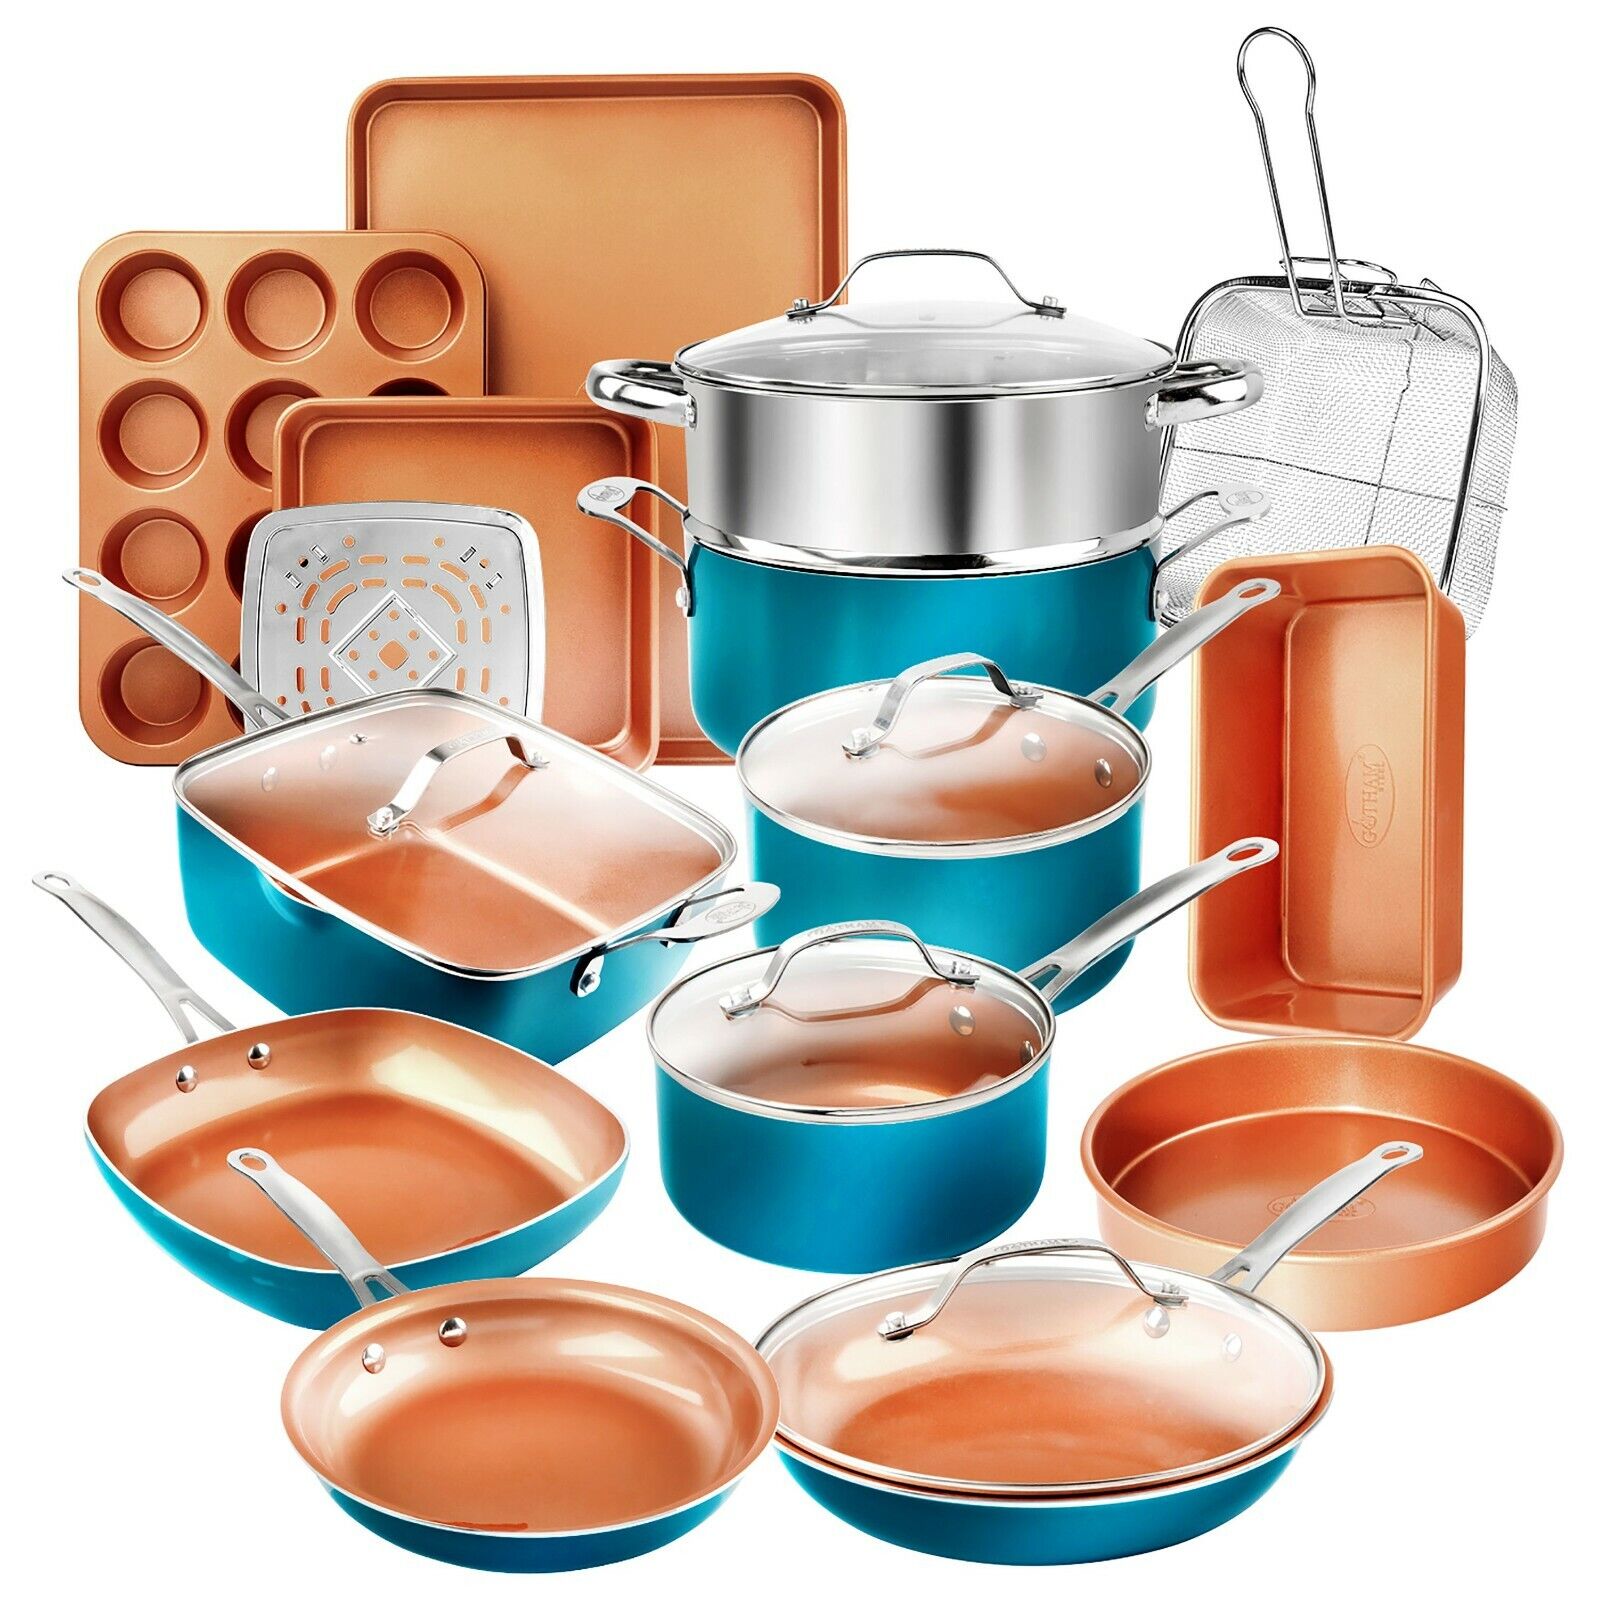 Gotham Steel 20 Piece Turquoise Cookware and Bakeware Set with Nonstick Coating